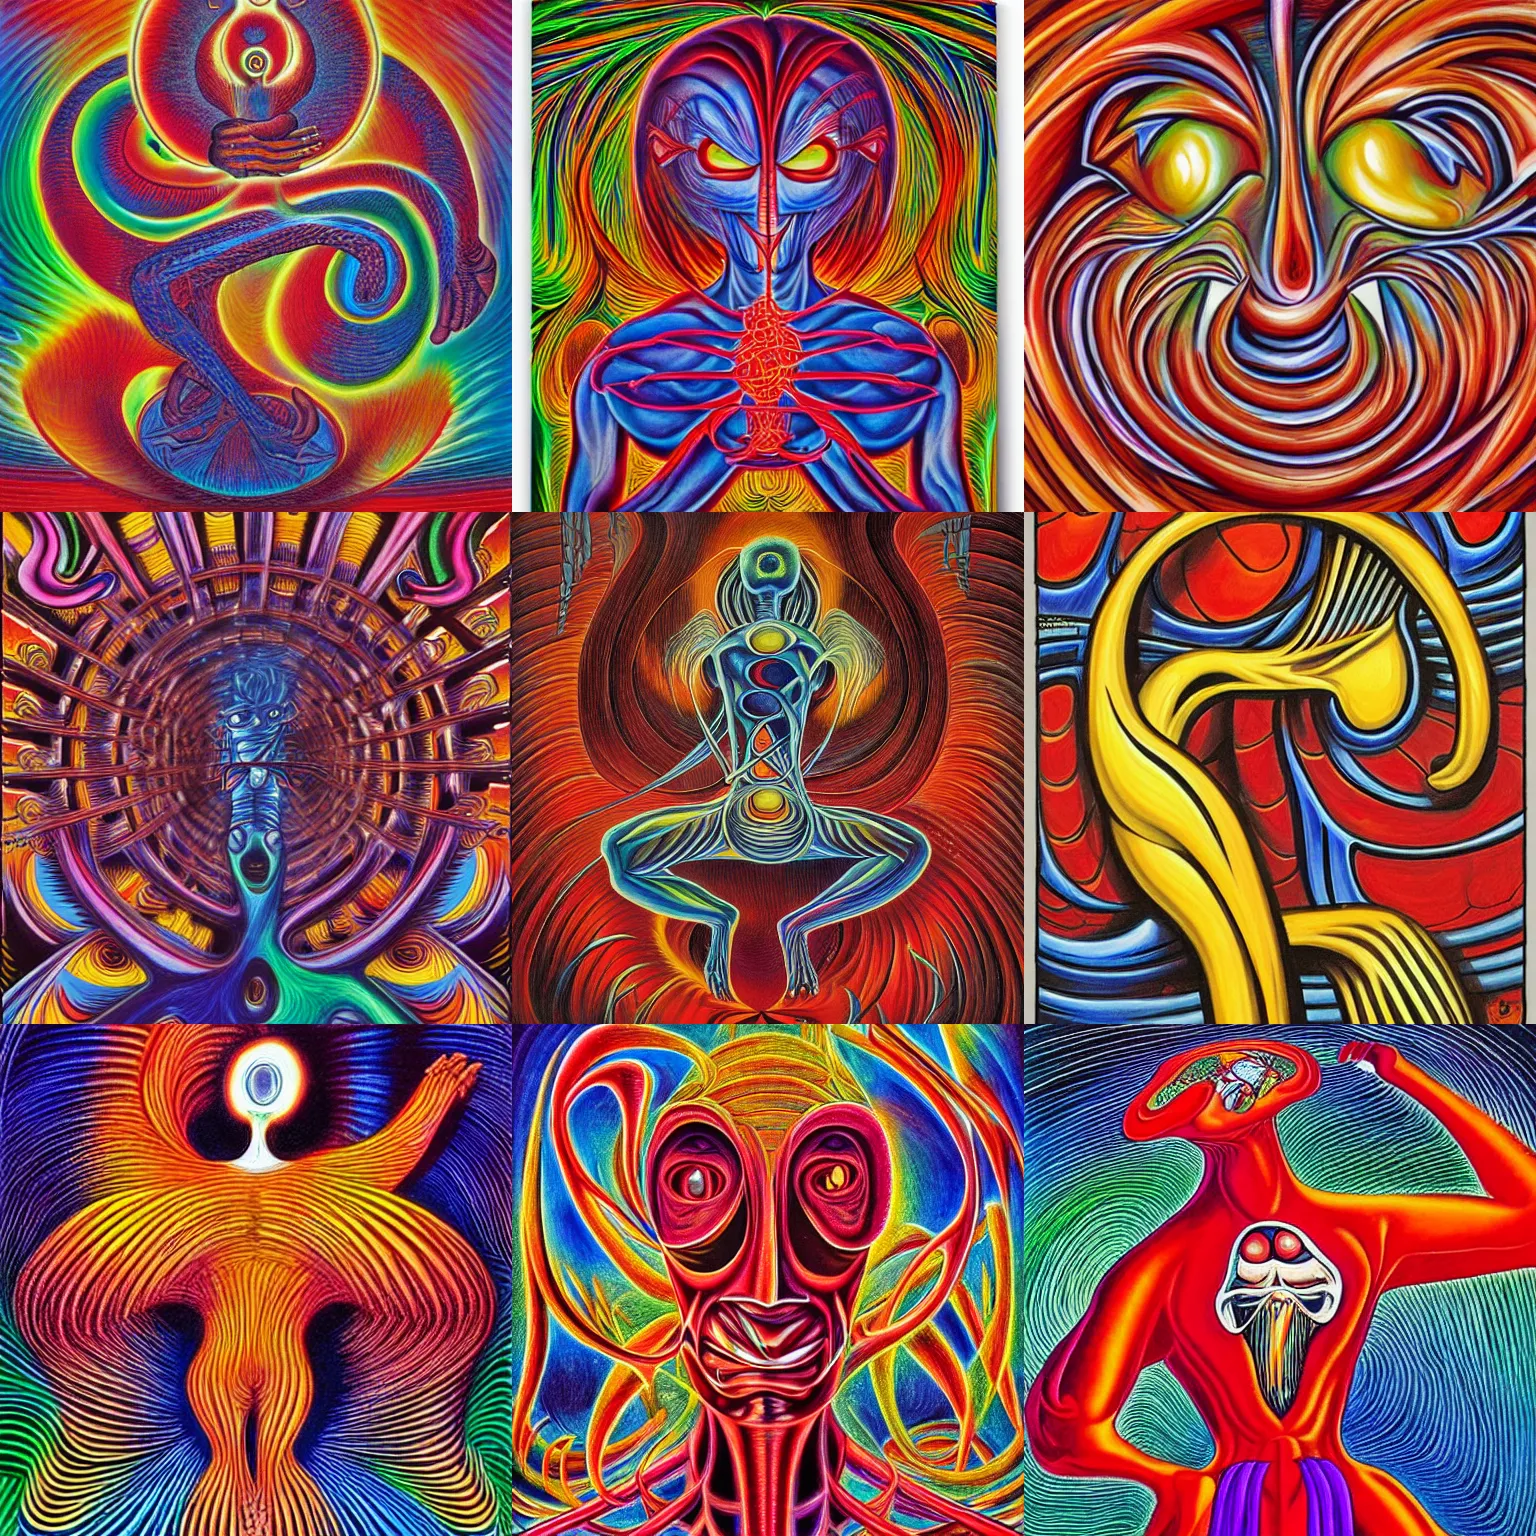 Prompt: Condorito, painted by Alex Grey, tool